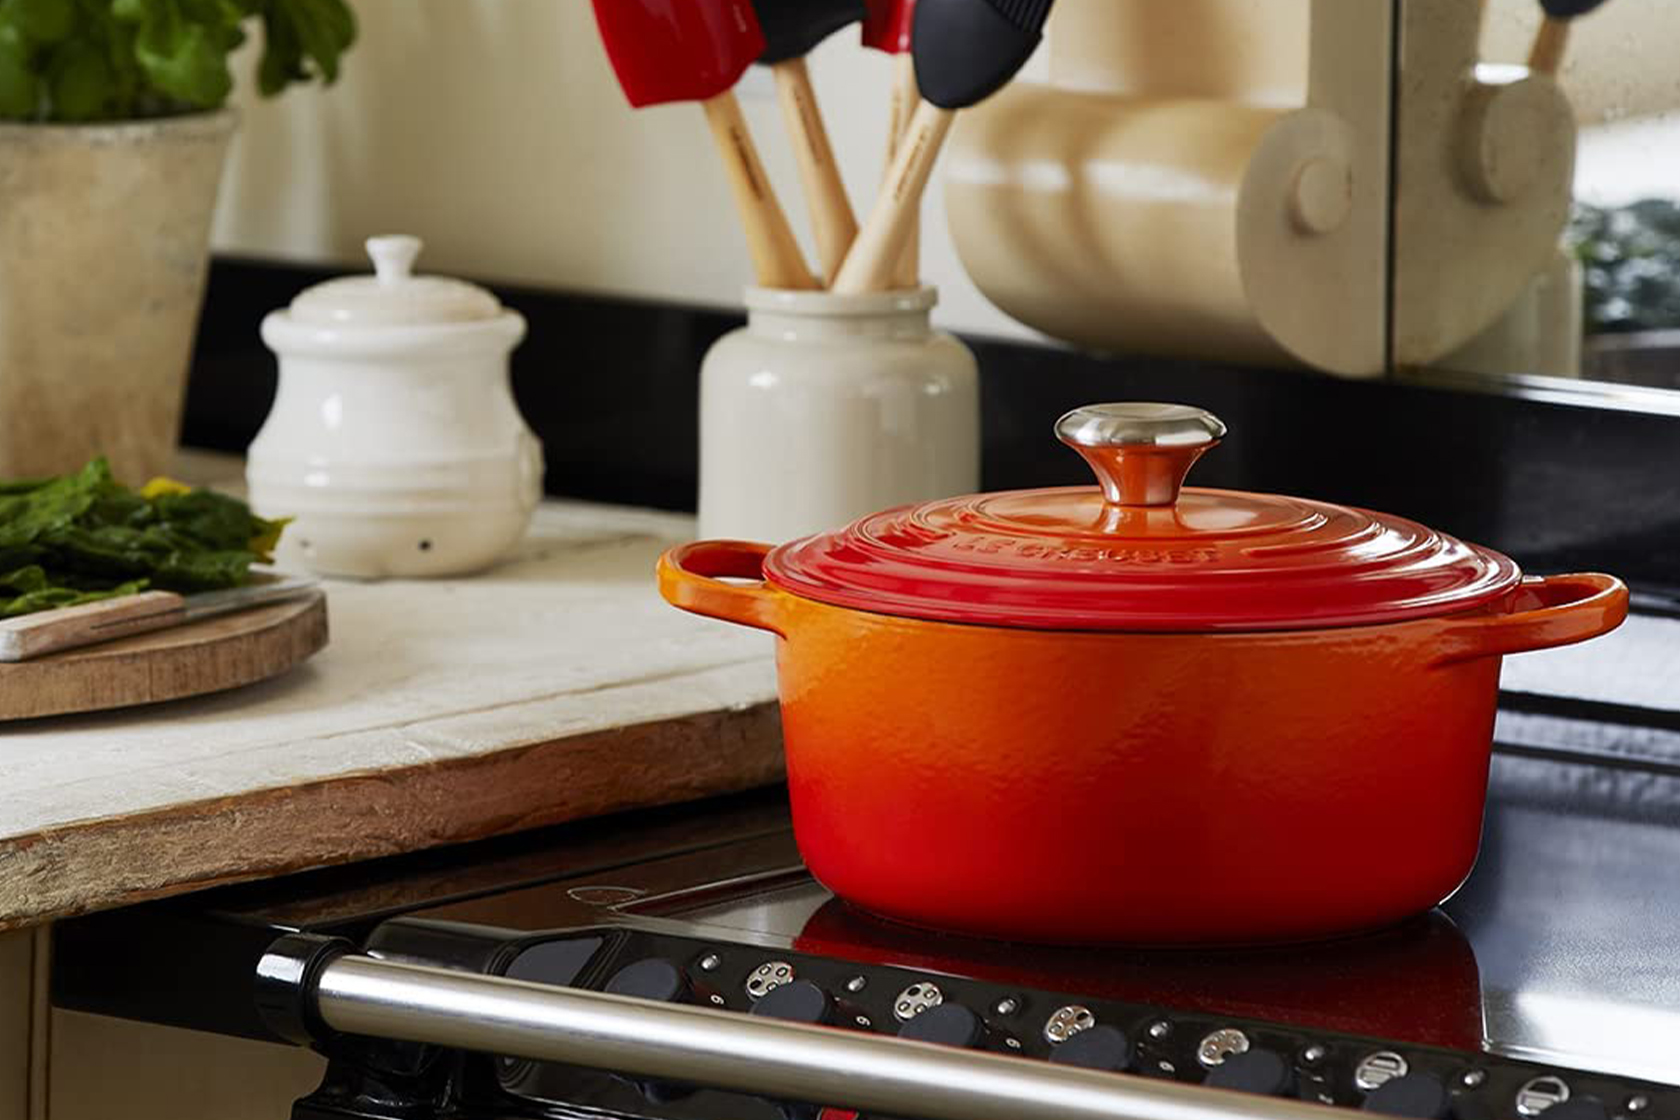 Le Creuset 4.5 Qt Cast Iron Dutch Oven In Stock Availability and Price